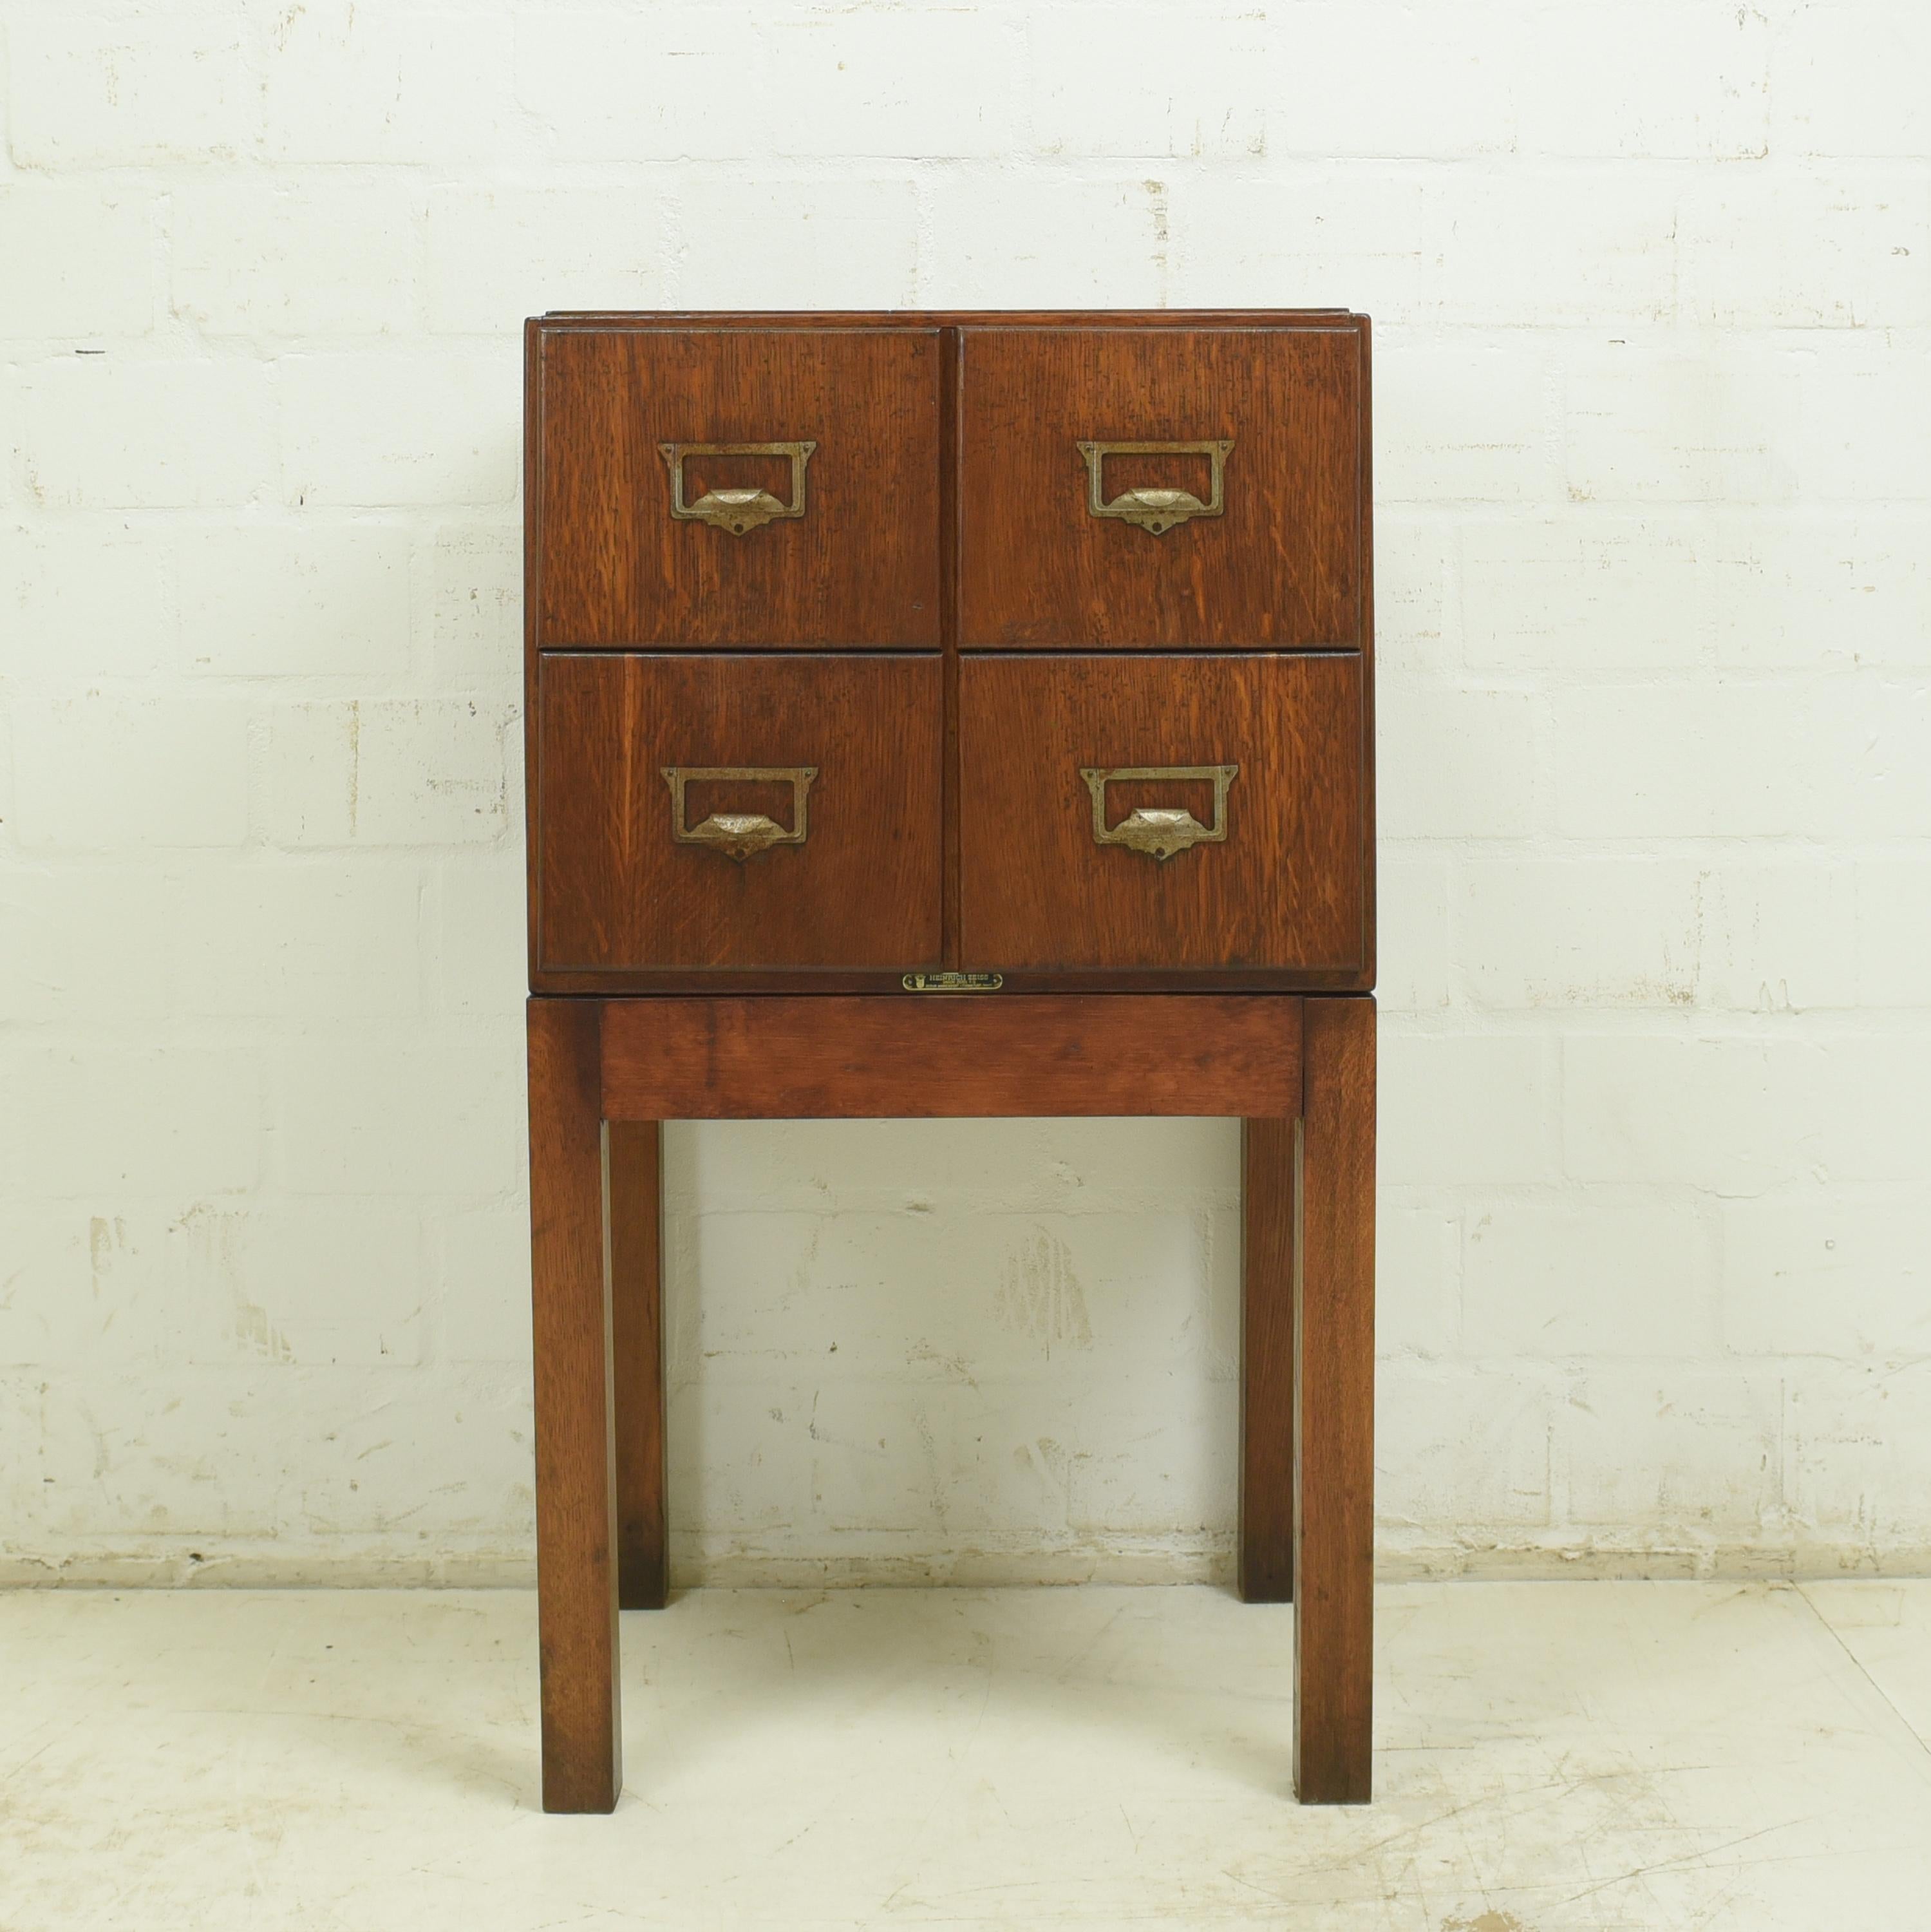 Small drawer cabinet restored ZEISS Art Deco 1925 filing cabinet

Features:
Four drawer box on frame
Original handles
Marked Heinrich Zeiss, Union Zeiss
Drawers suitable for DIN A4
Very nice patina
Functional, timelessly beautiful